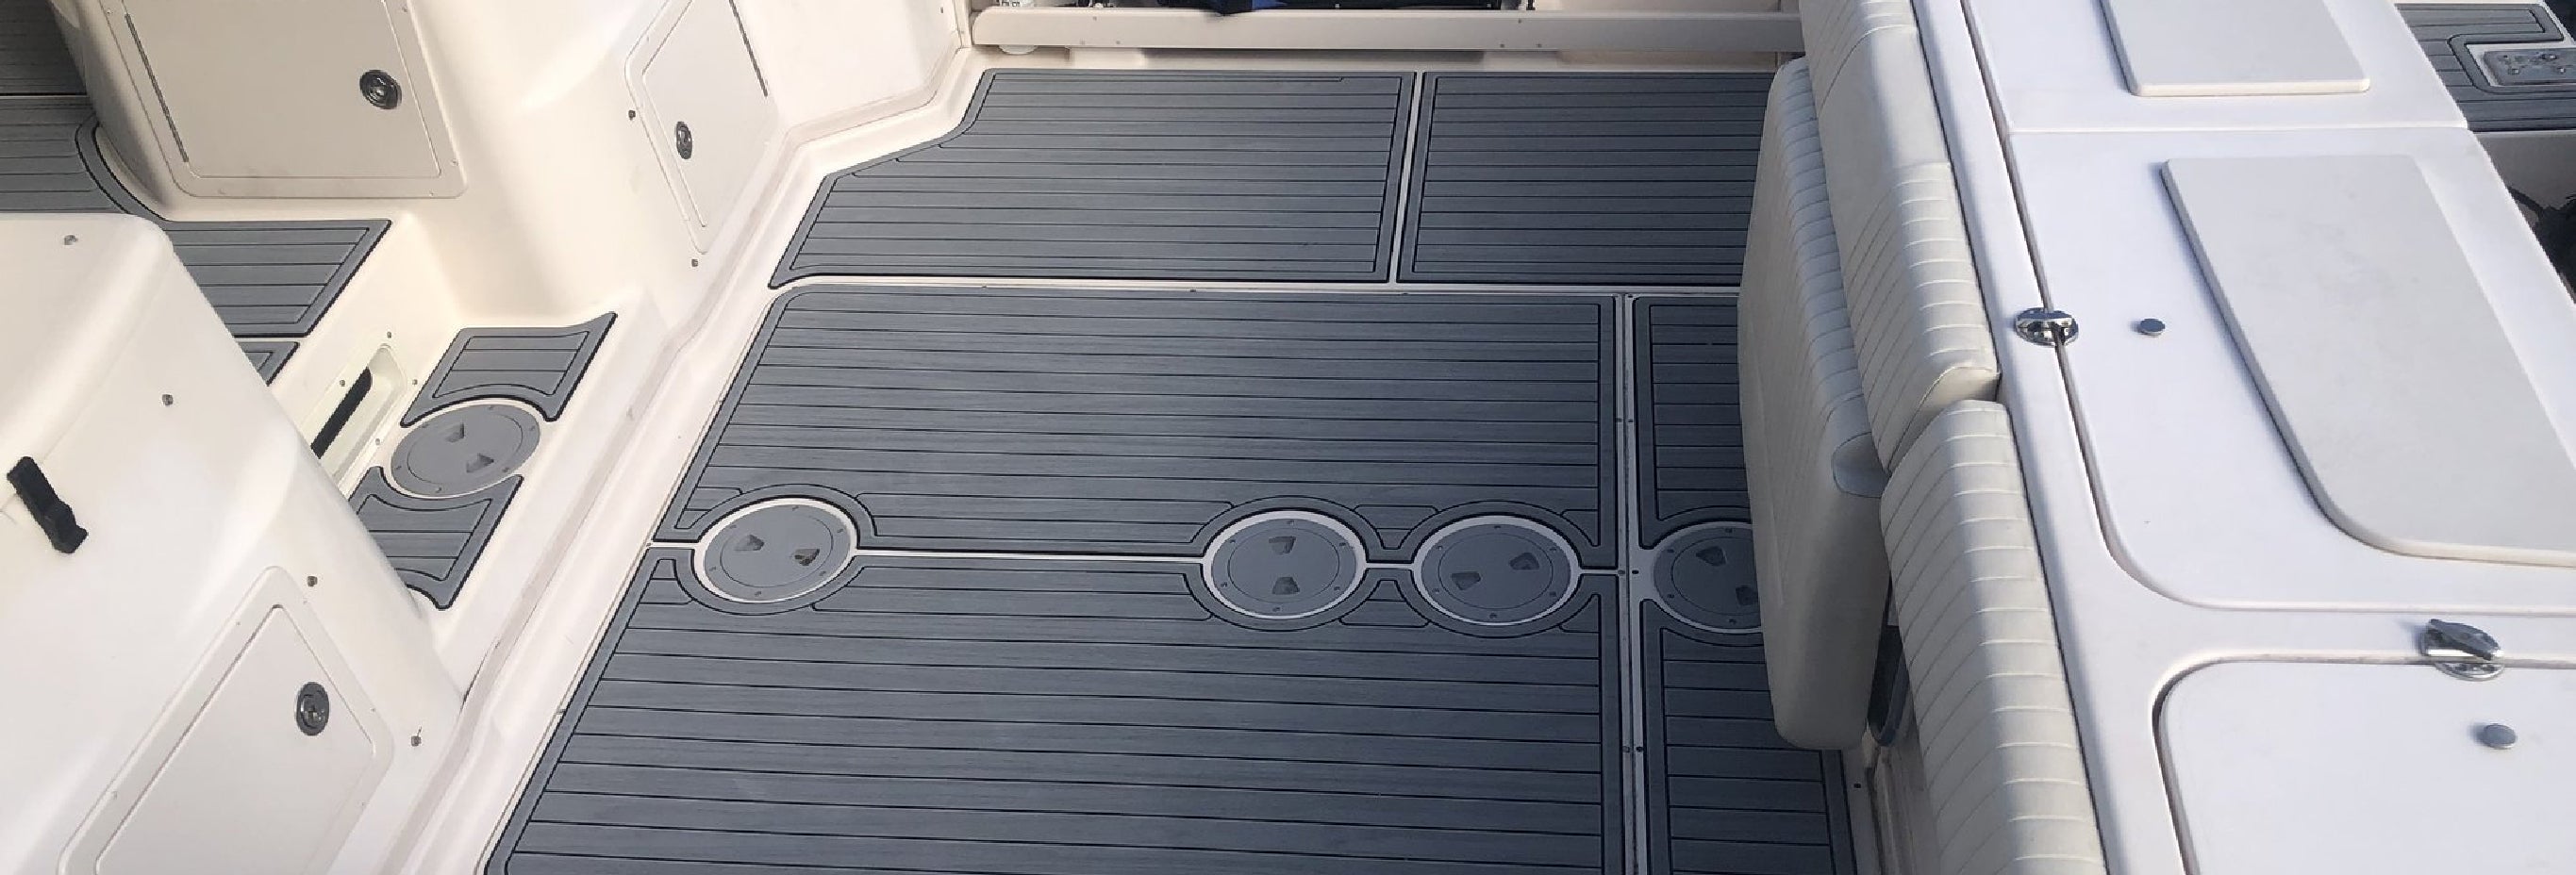 ELEVATE YOUR BOATING EXPERIENCE WITH DECK PLATES AND ACCESS HATCHES